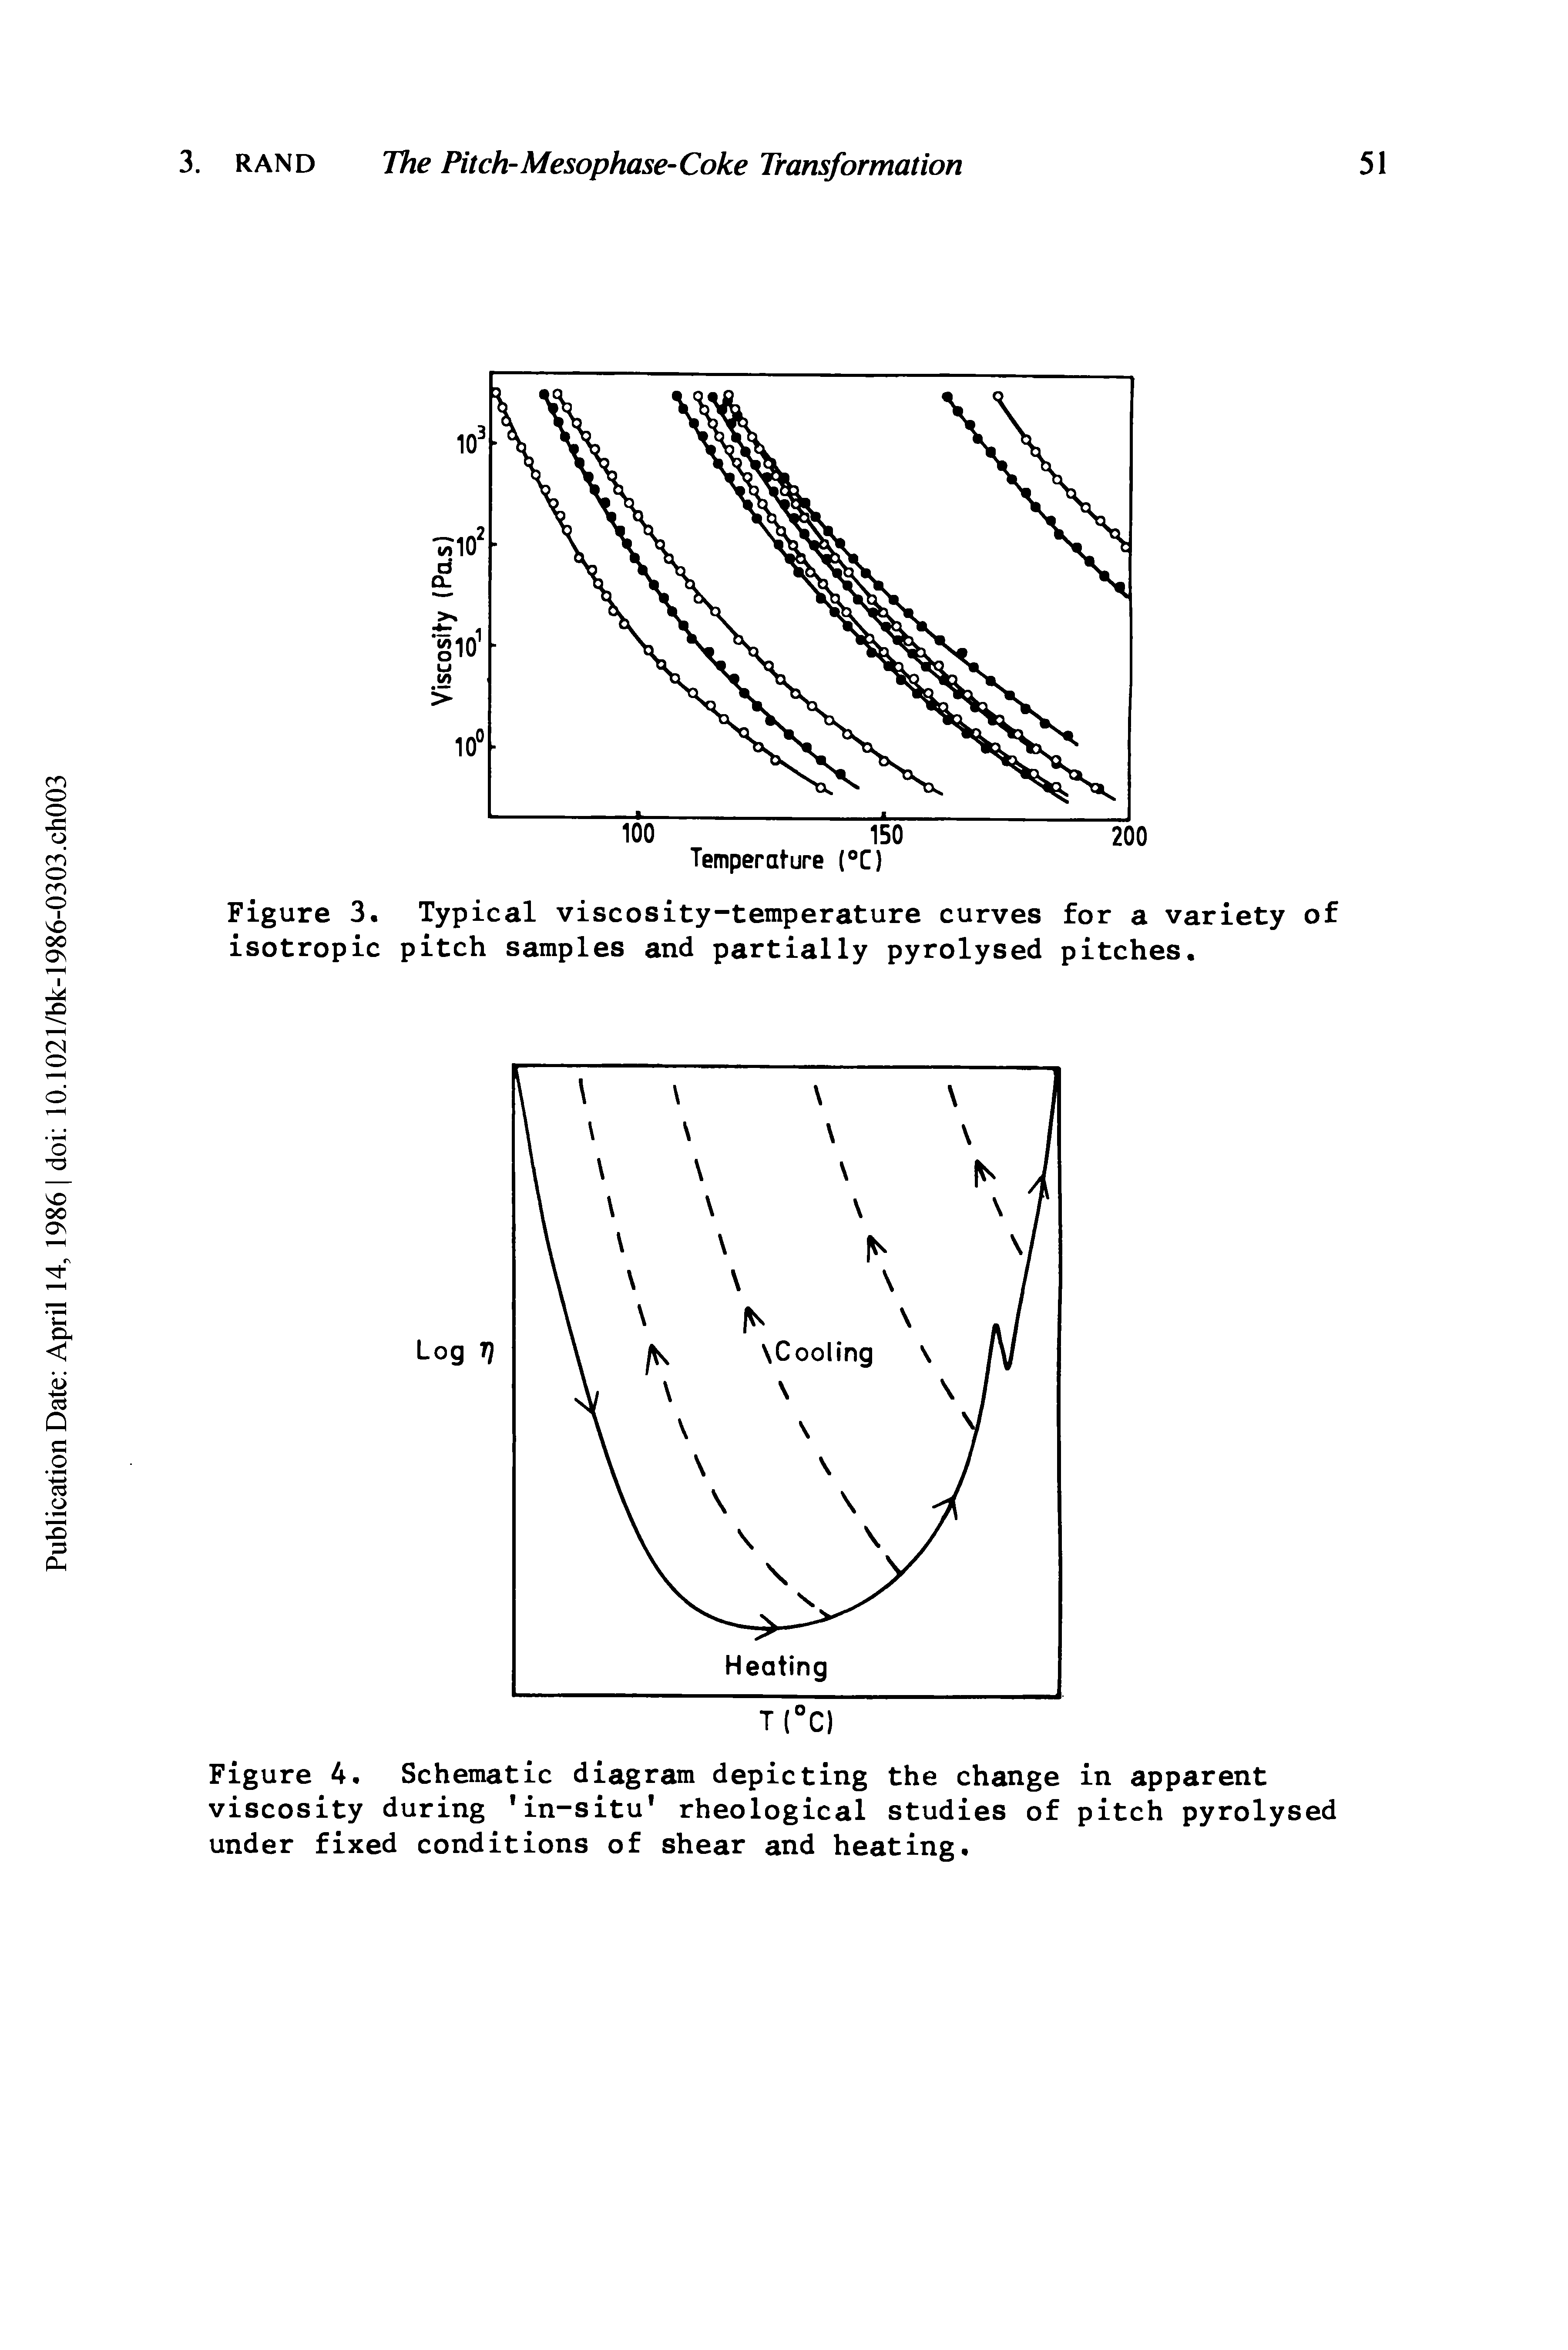 Figure 3. Typical viscosity-temperature curves for a variety of isotropic pitch samples and partially pyrolysed pitches.